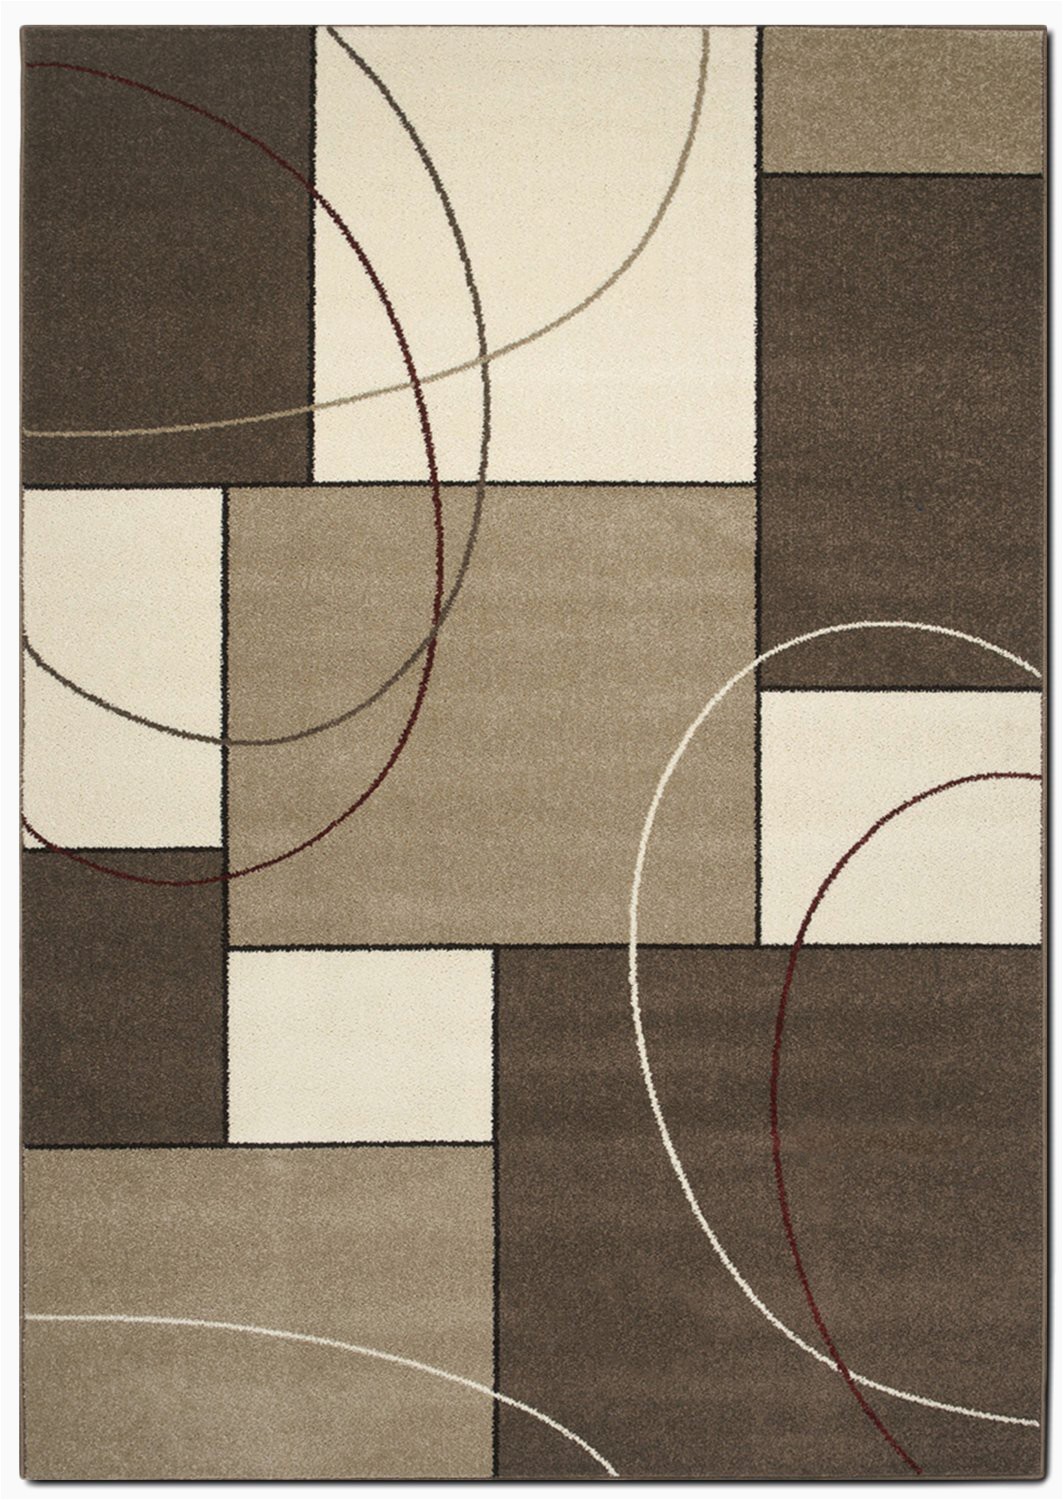 5 X 11 area Rug Casa Abstract 8 X 11 area Rug Cream and Taupe